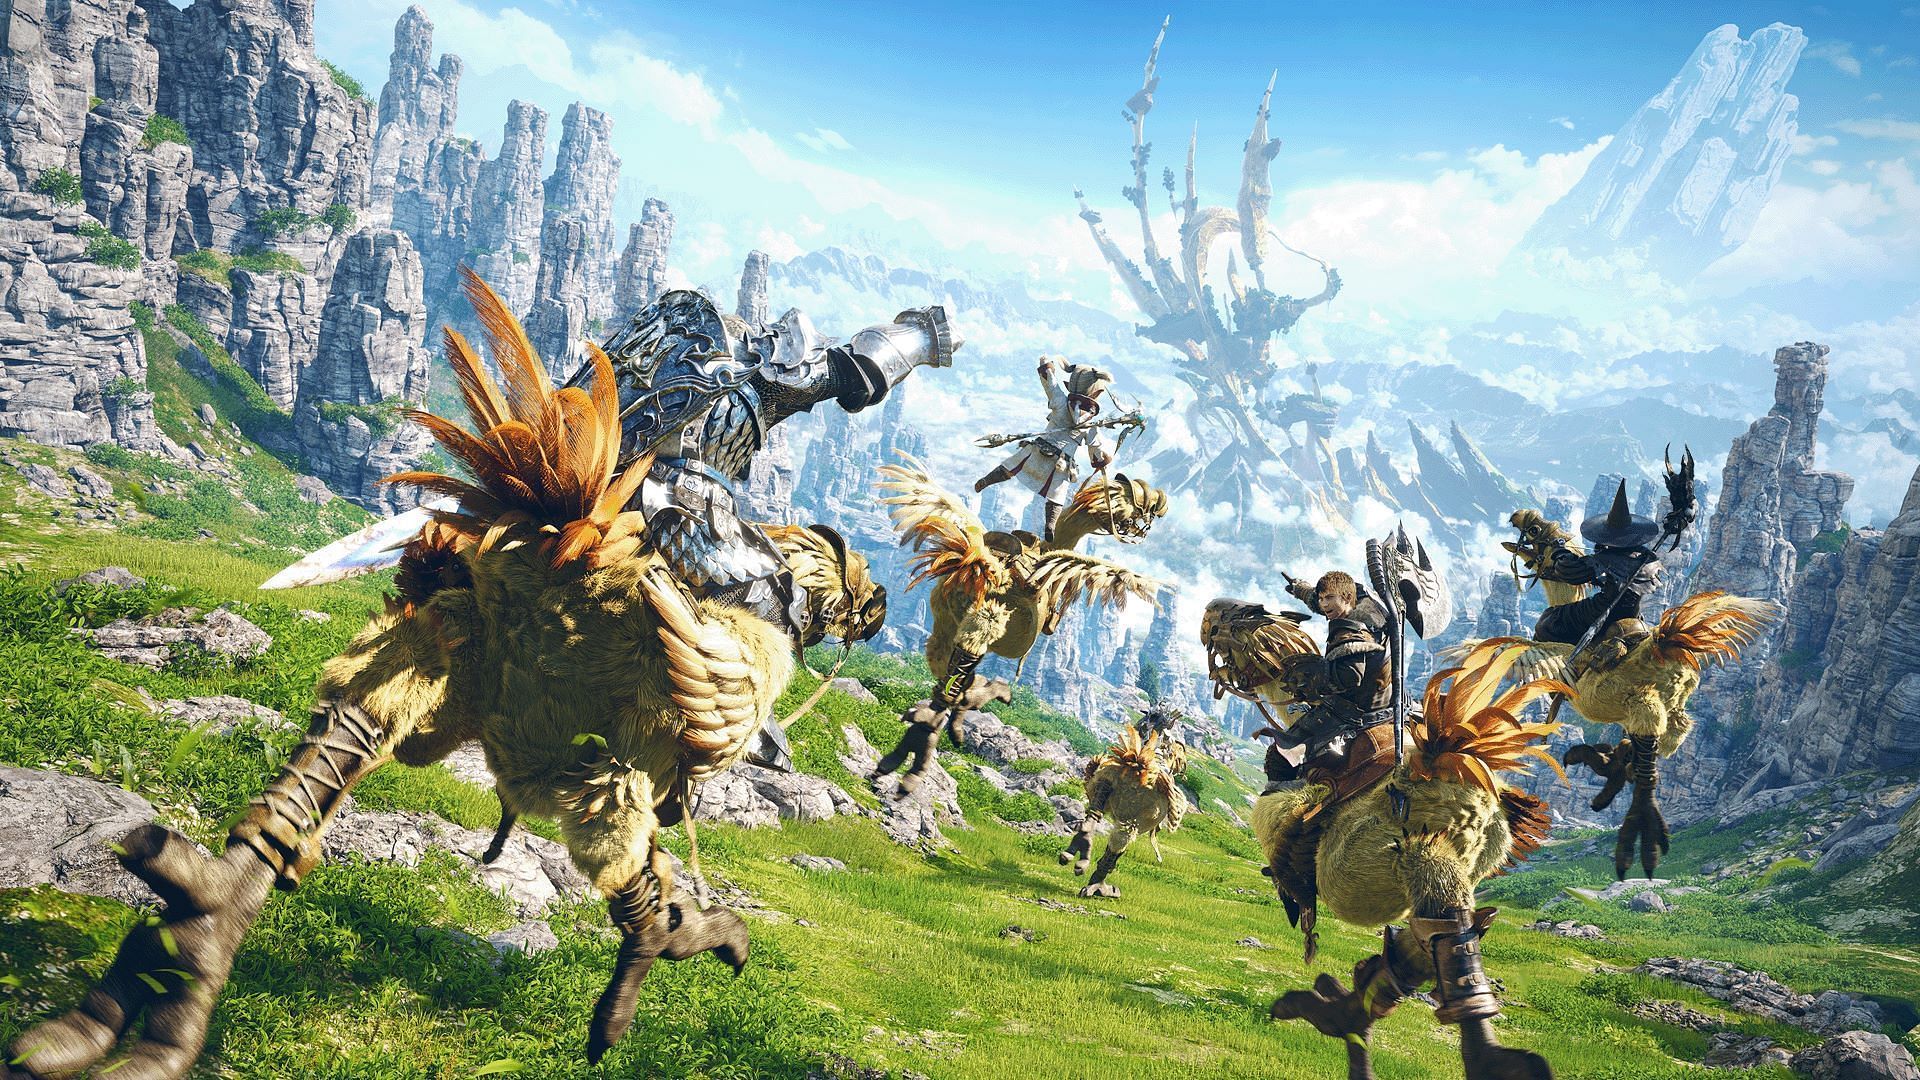 Final Fantasy 14 offers a riveting setting and gameplay loop (Image via Square Enix)